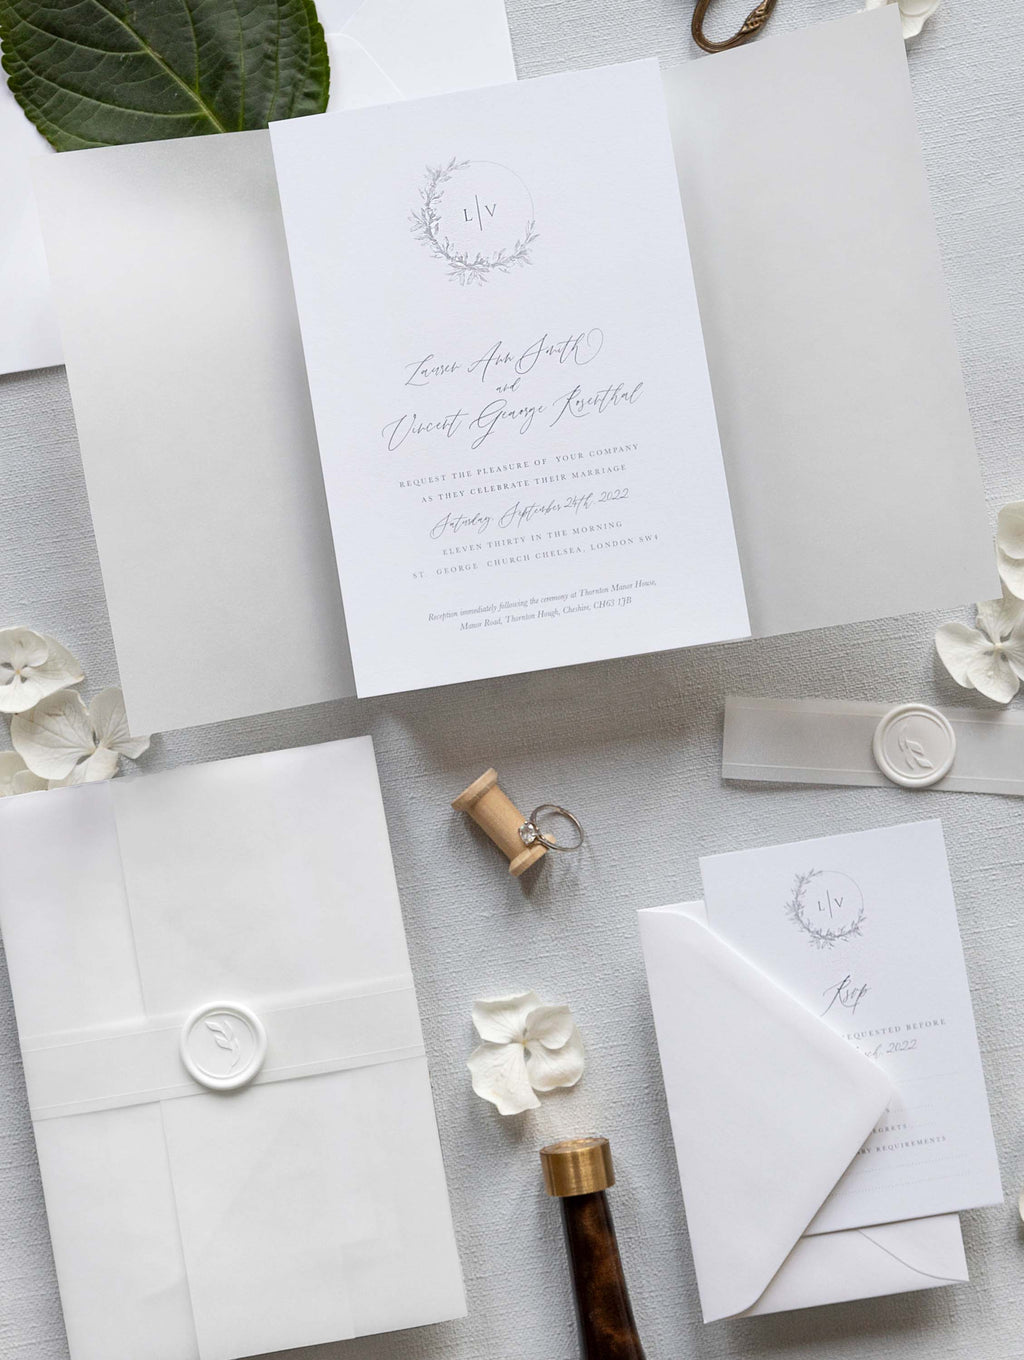 Transparent Vellum Wrap for invitations - Daylight Letters